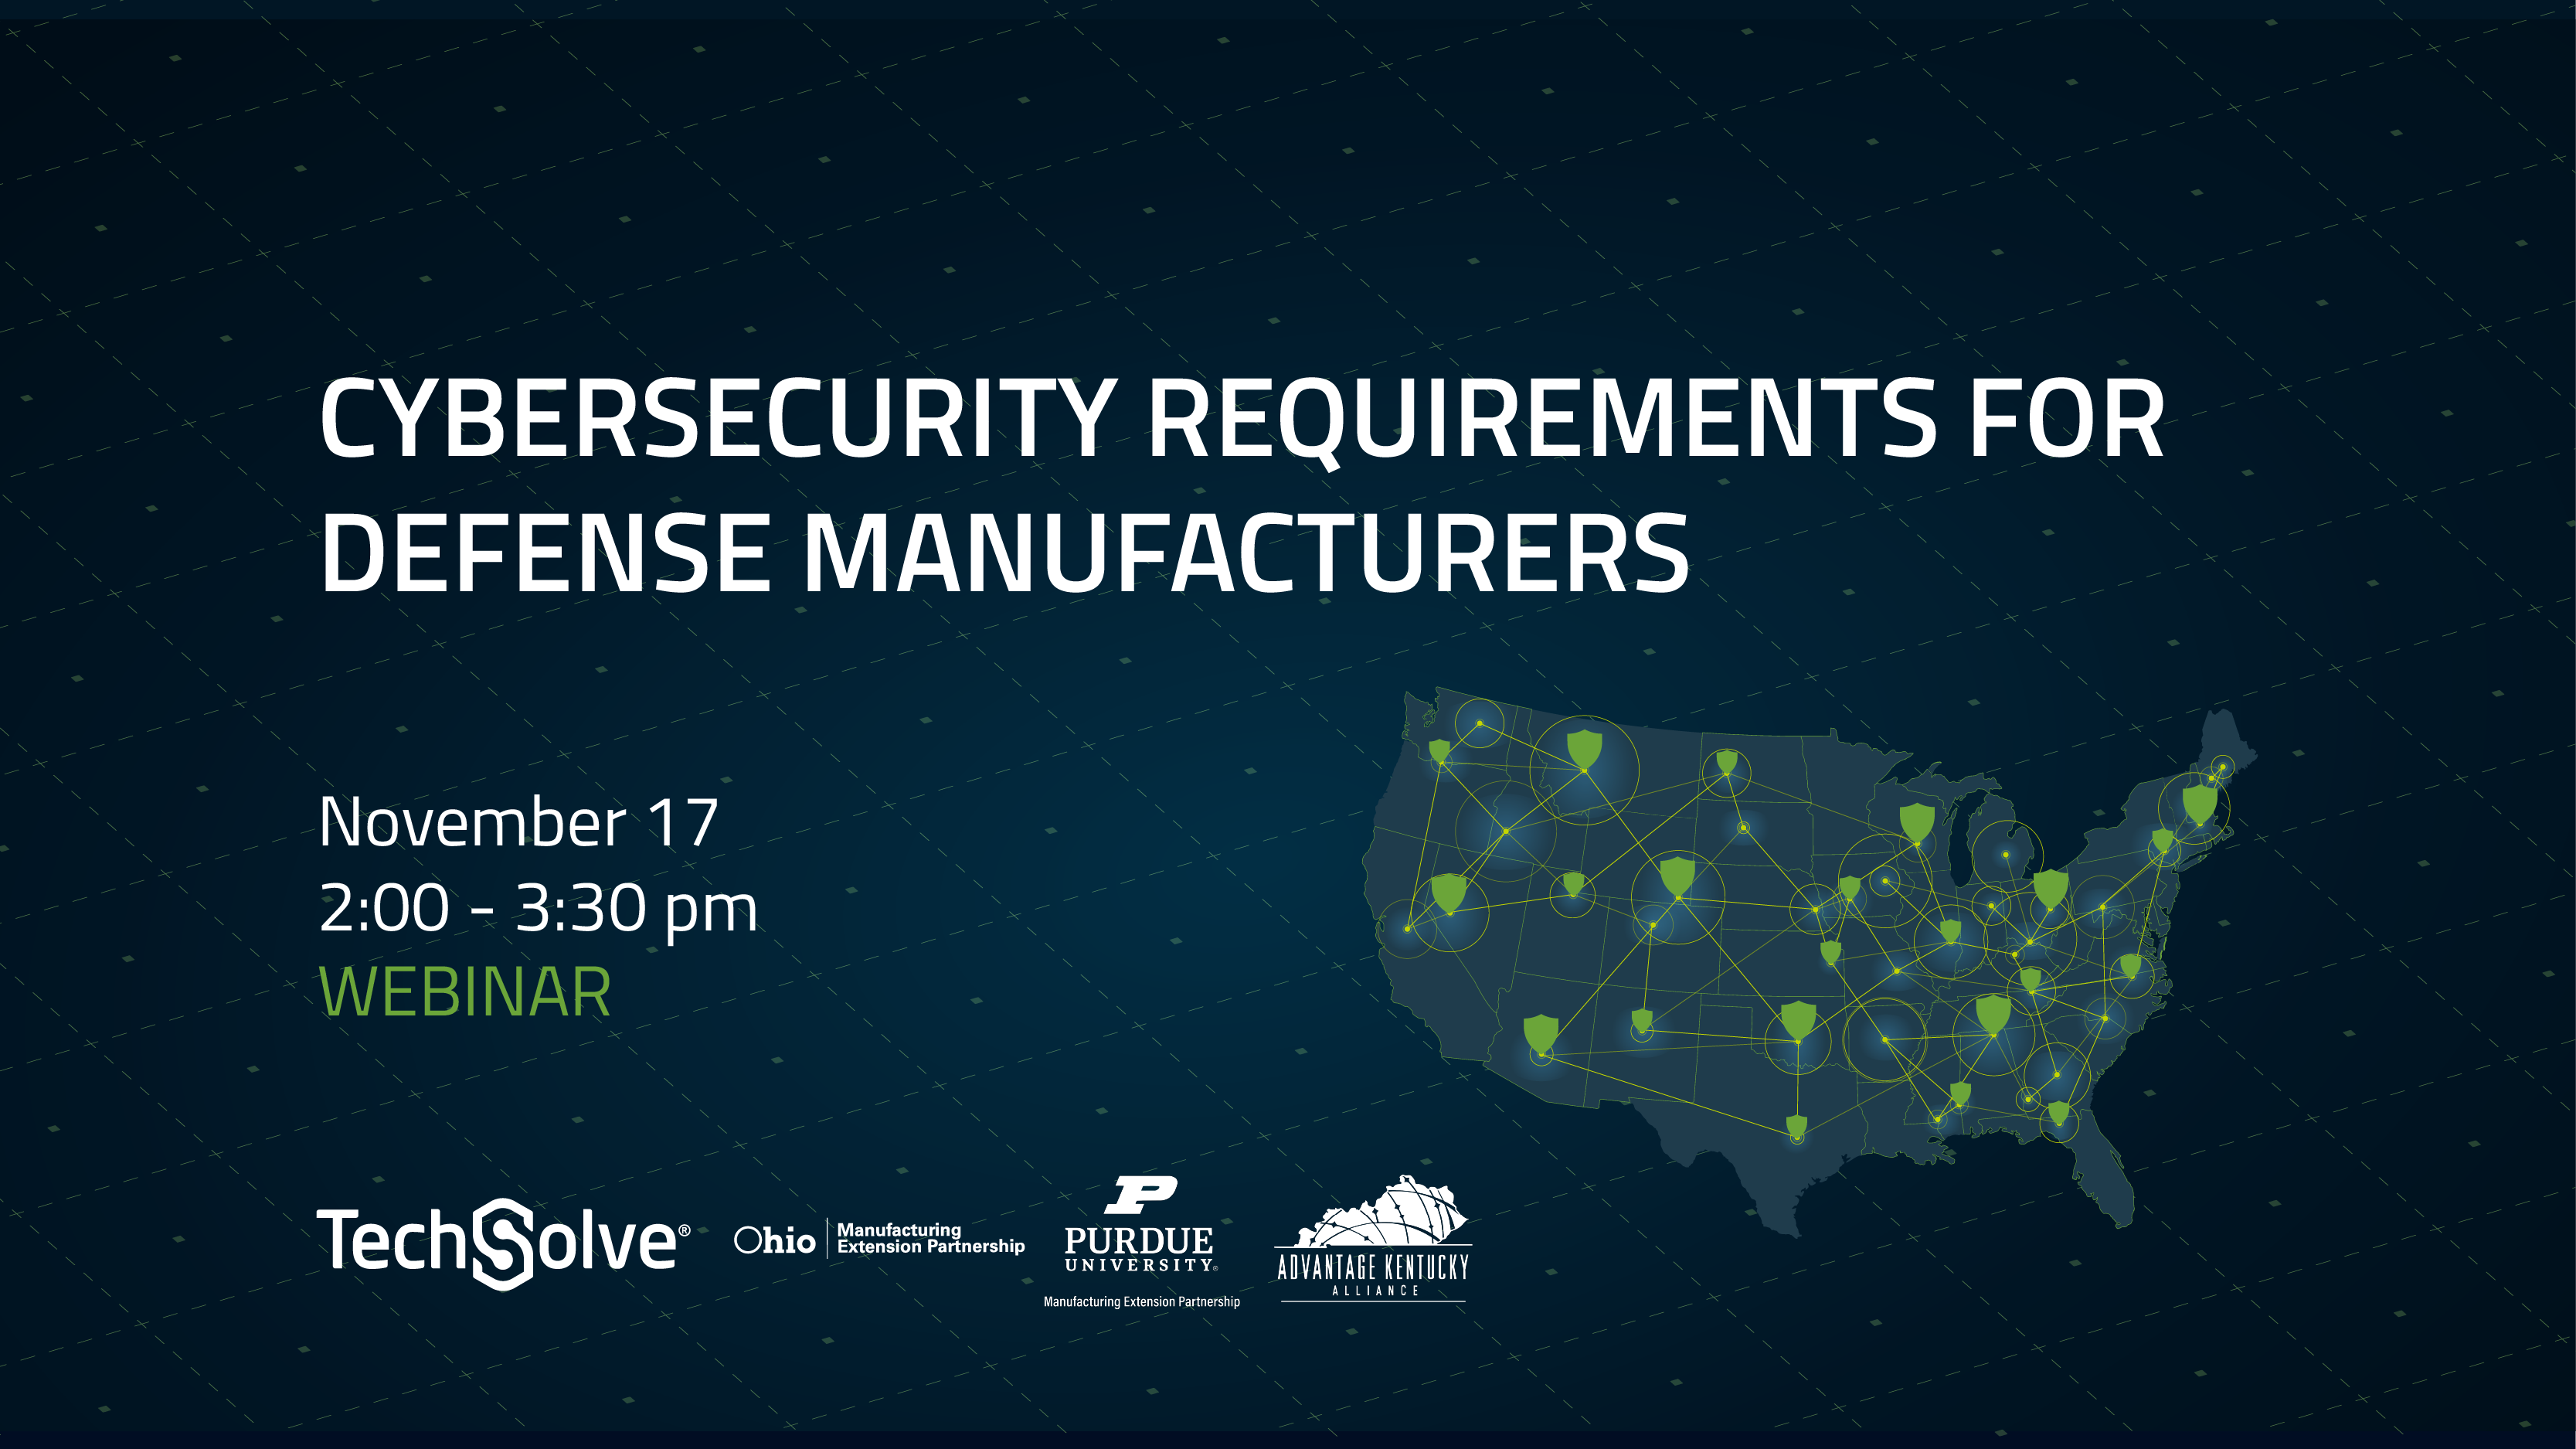 Cybersecurity Requirements for Defense Manufacturers Webinar